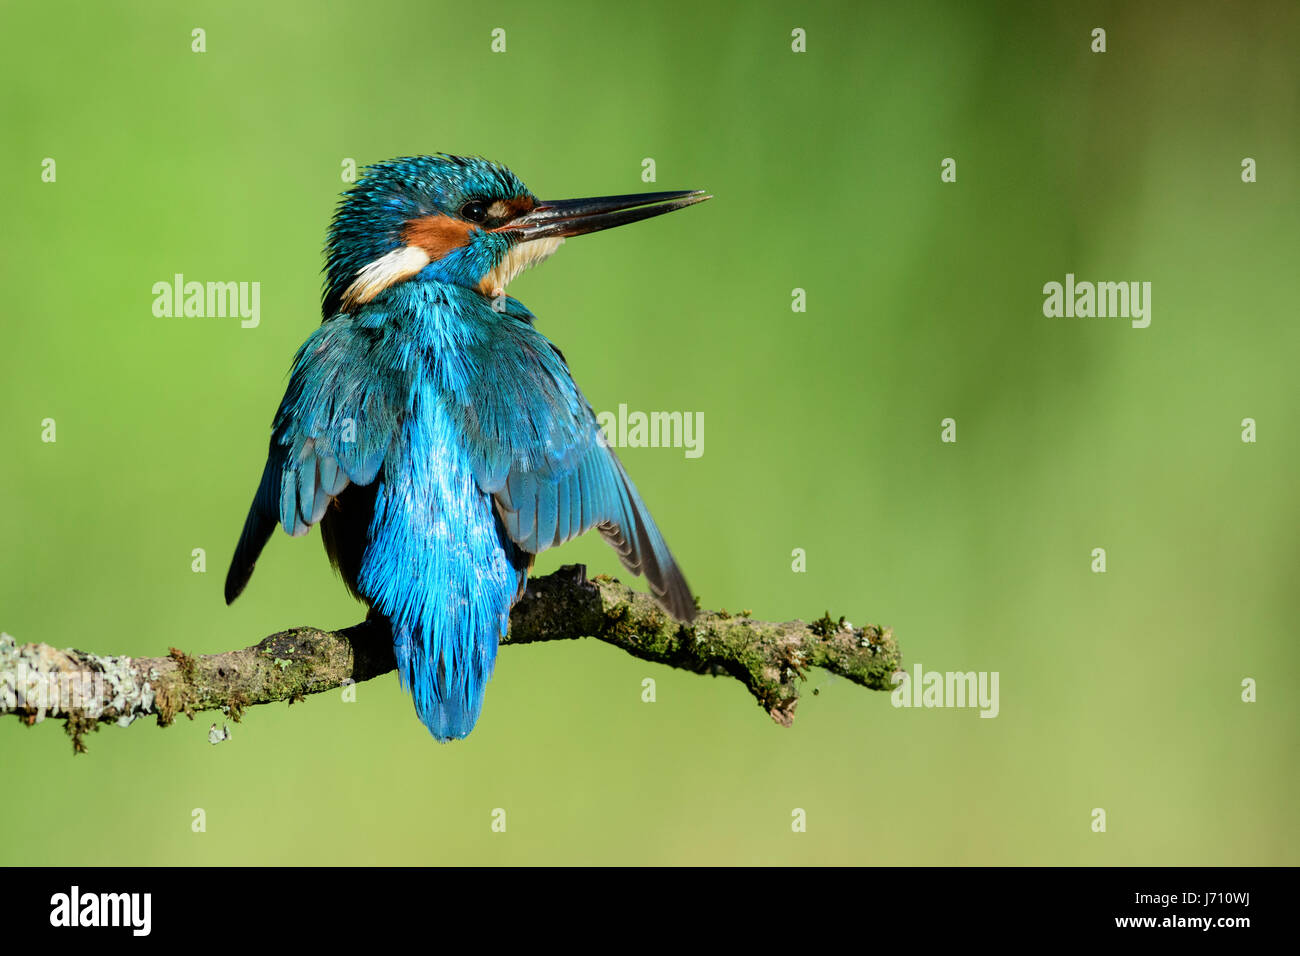 Kingfisher with hanging shaking wings greeting his partner Stock Photo